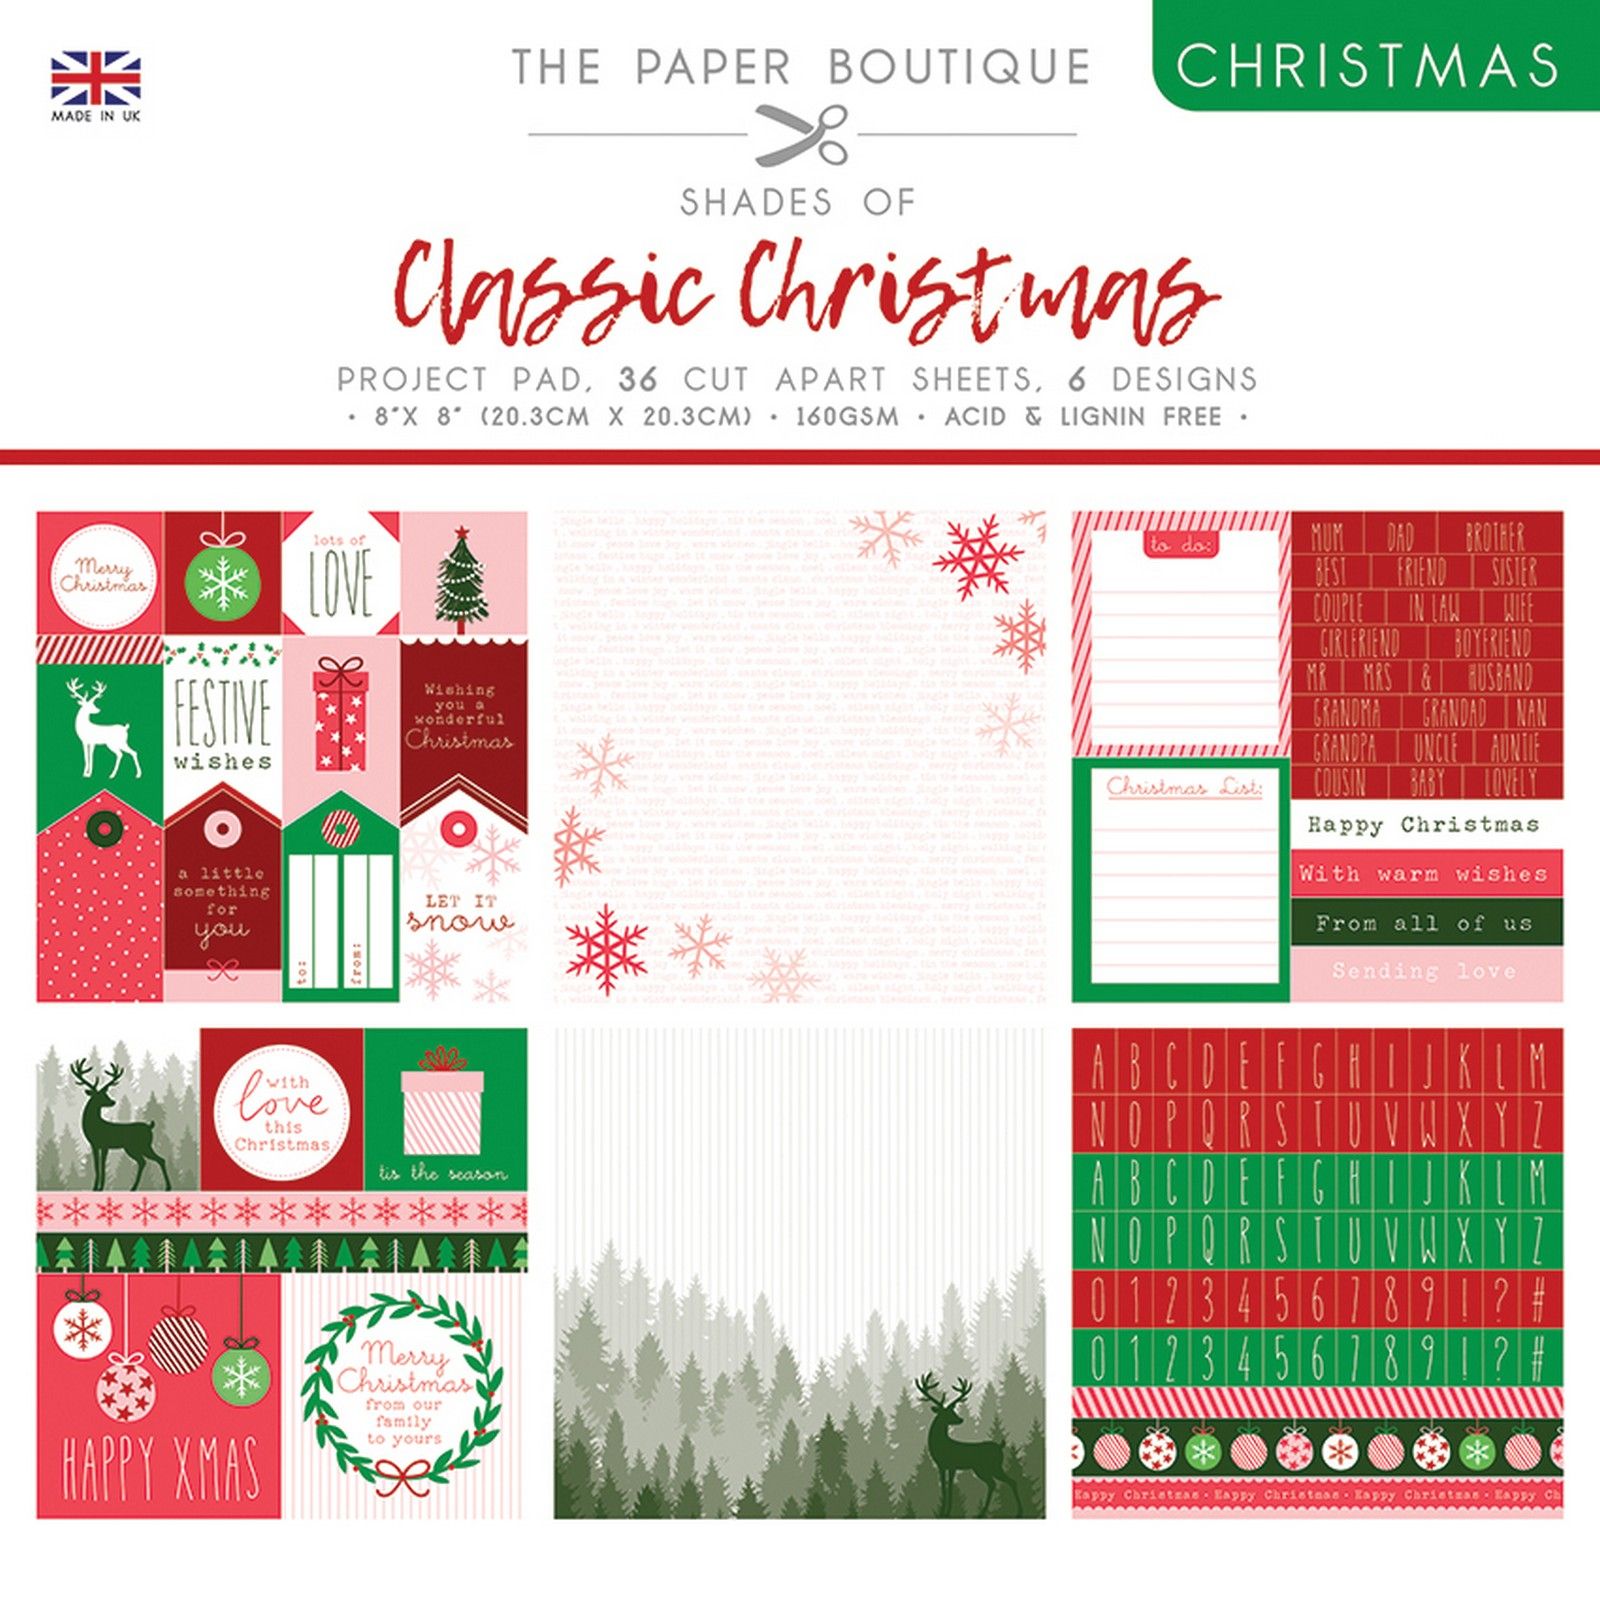 The Paper Boutique • Shades of classic Christmas project pad